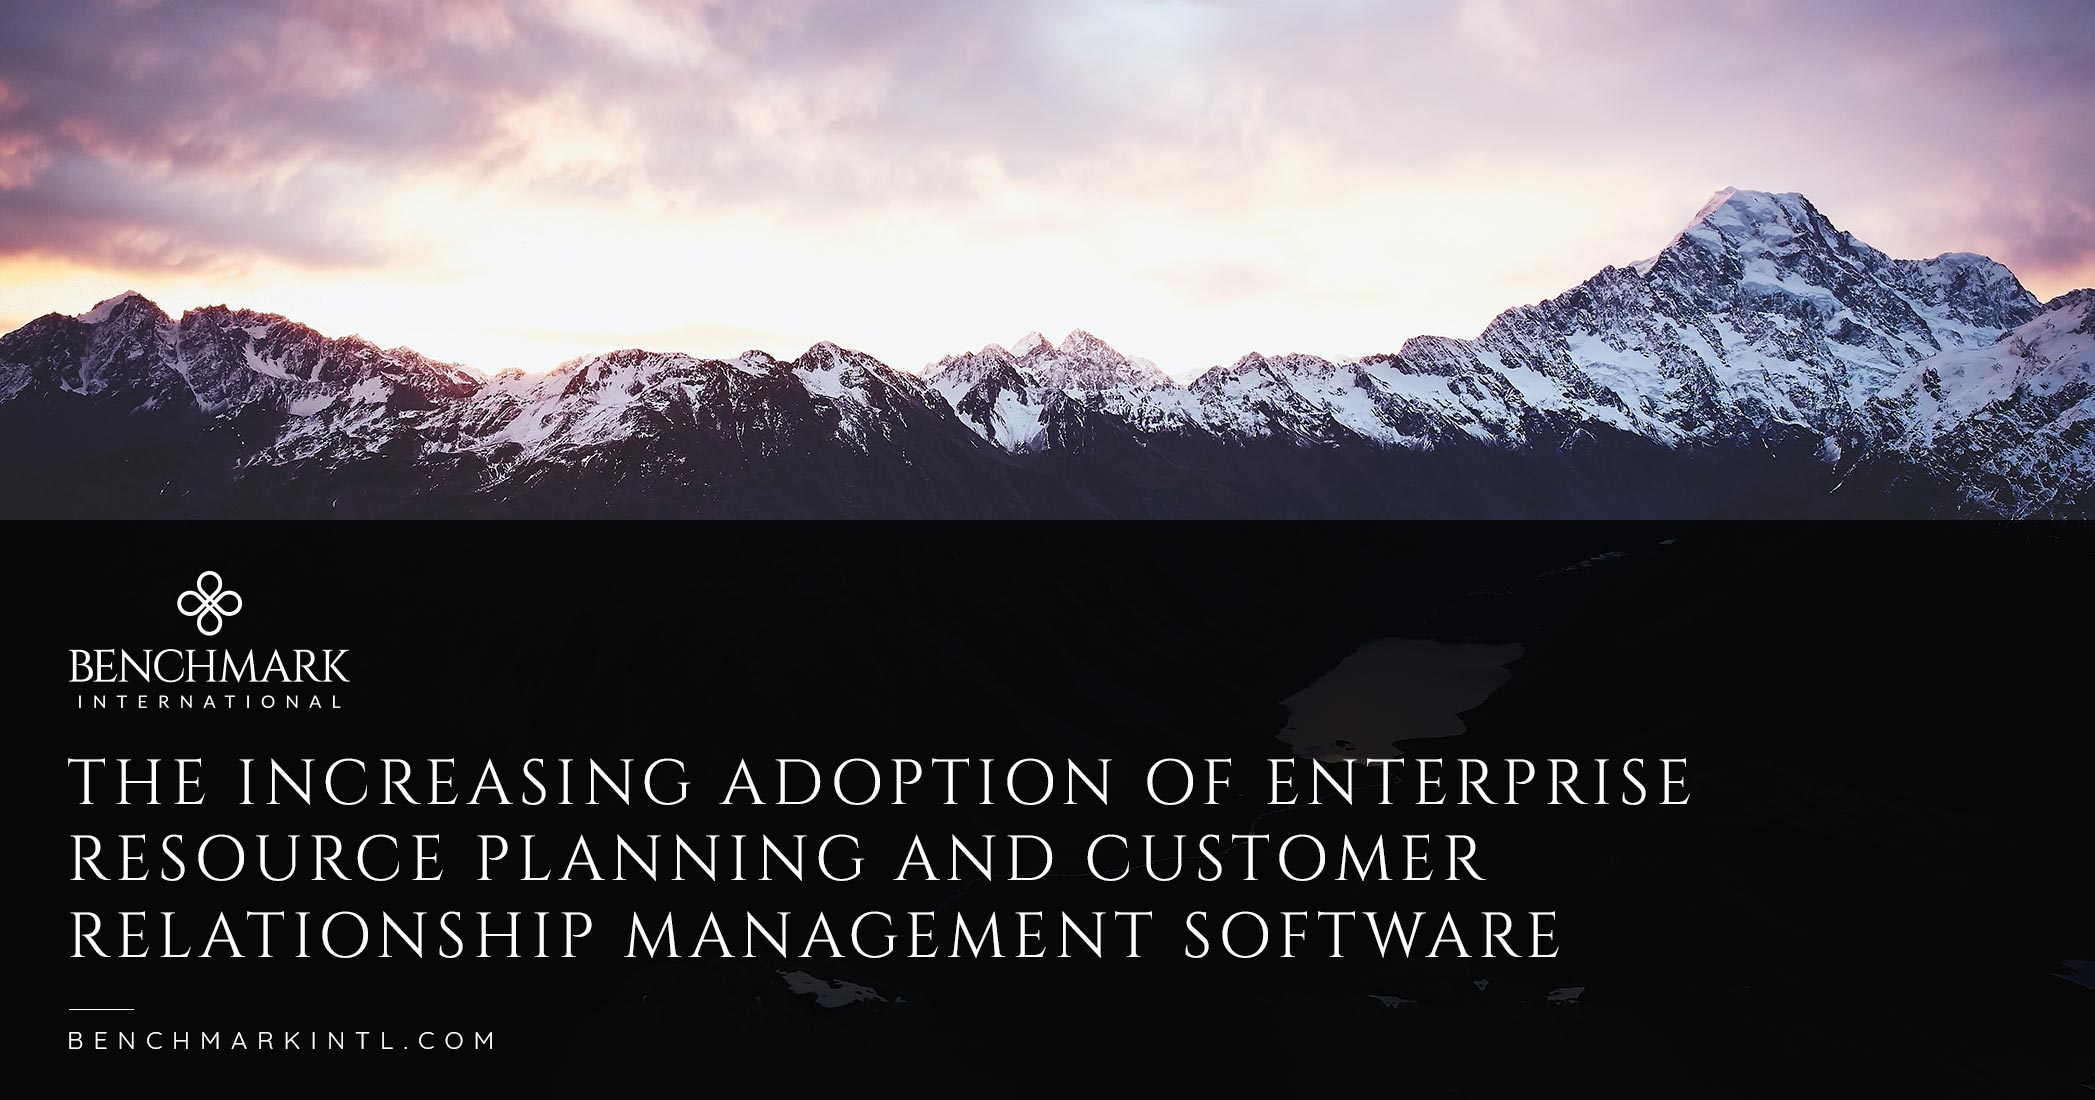 The Increasing Adoption Of Enterprise Resource Planning And Customer Relationship Management Software